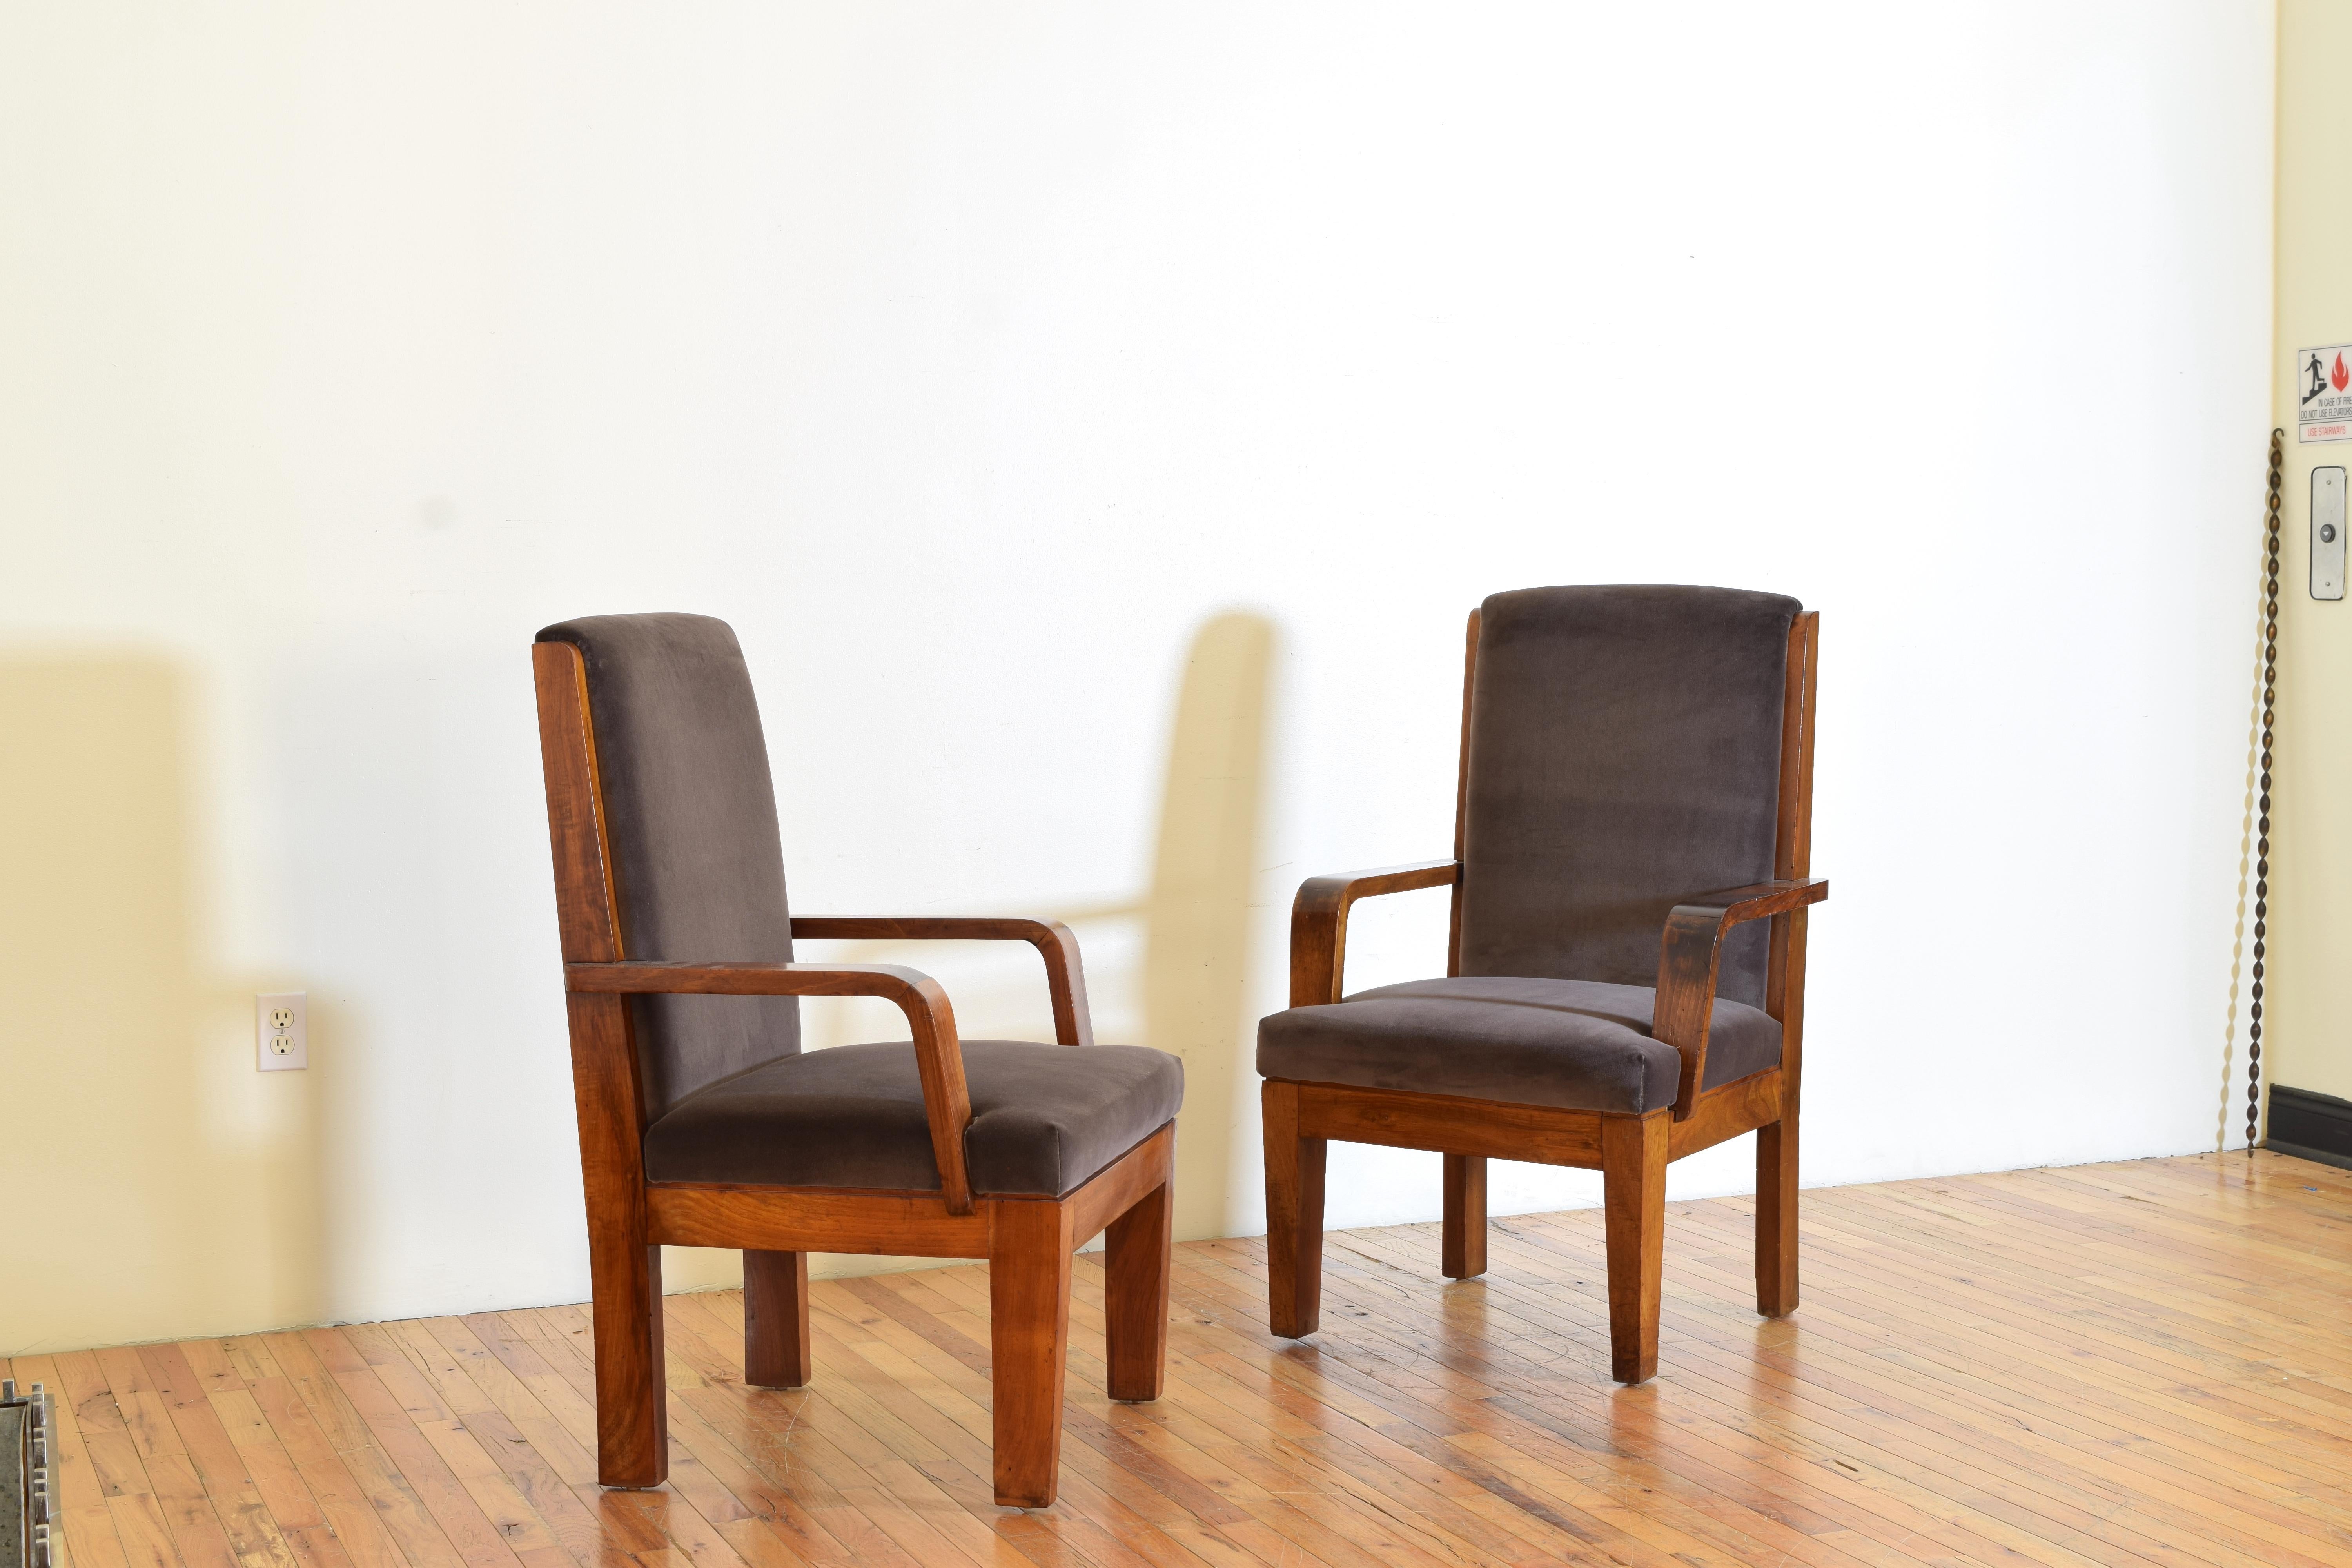 Each chair with a slightly arched backrest the upholstered back within a walnut framework that continues to the rear of the chair, the padded inset seat below rounded armrests, the legs are block and slightly tapering